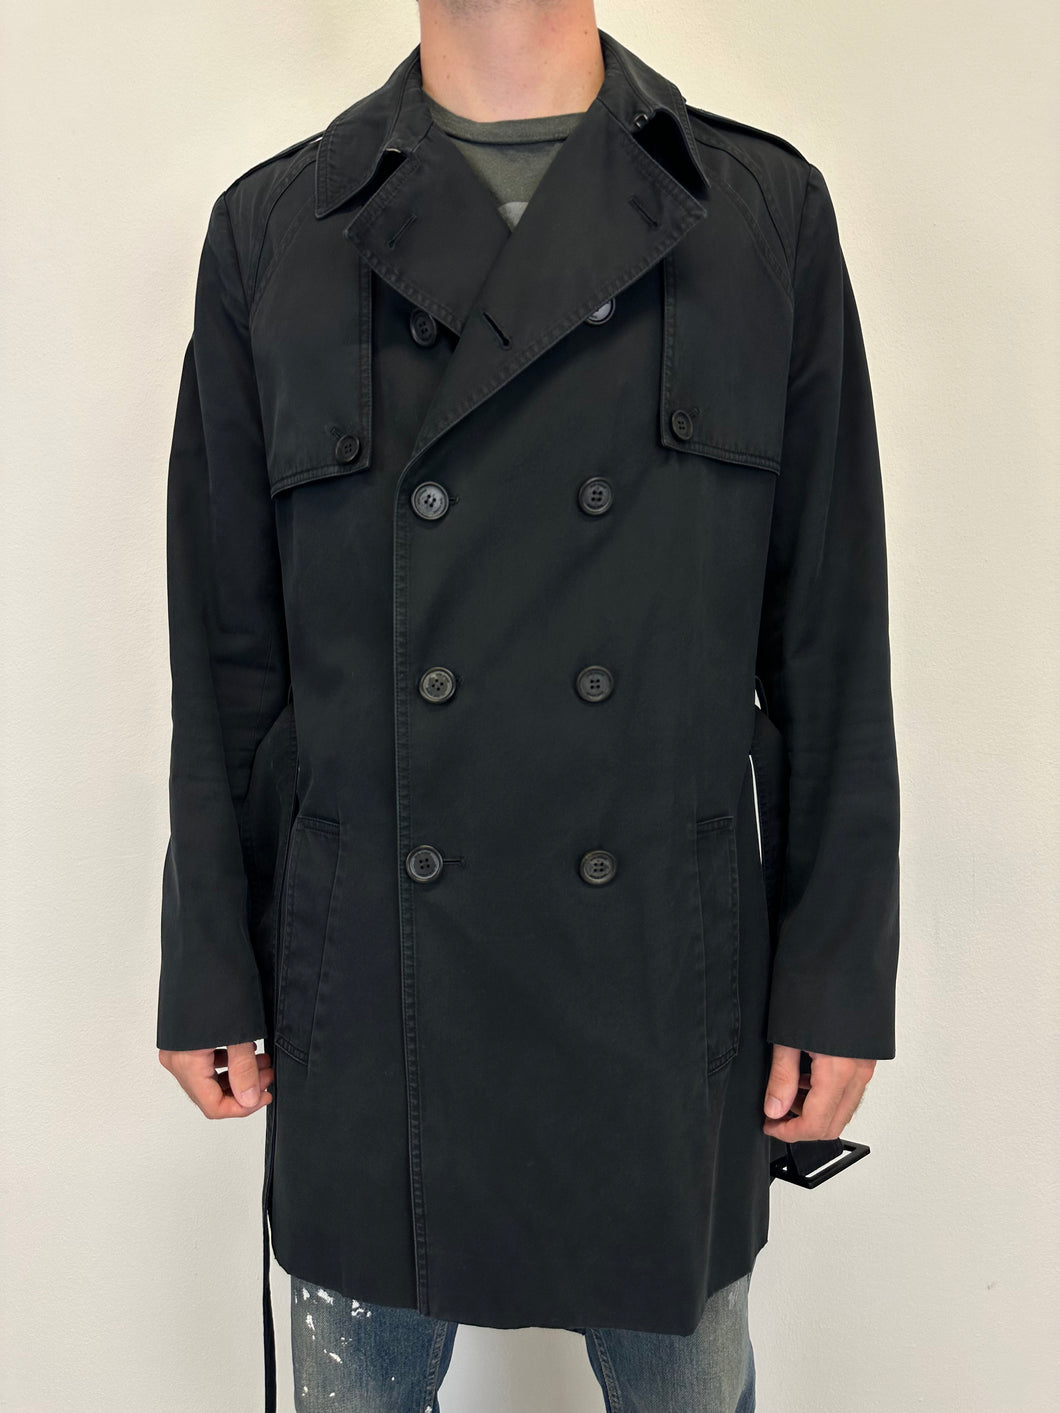 SS09 Dior double breasted trench coat